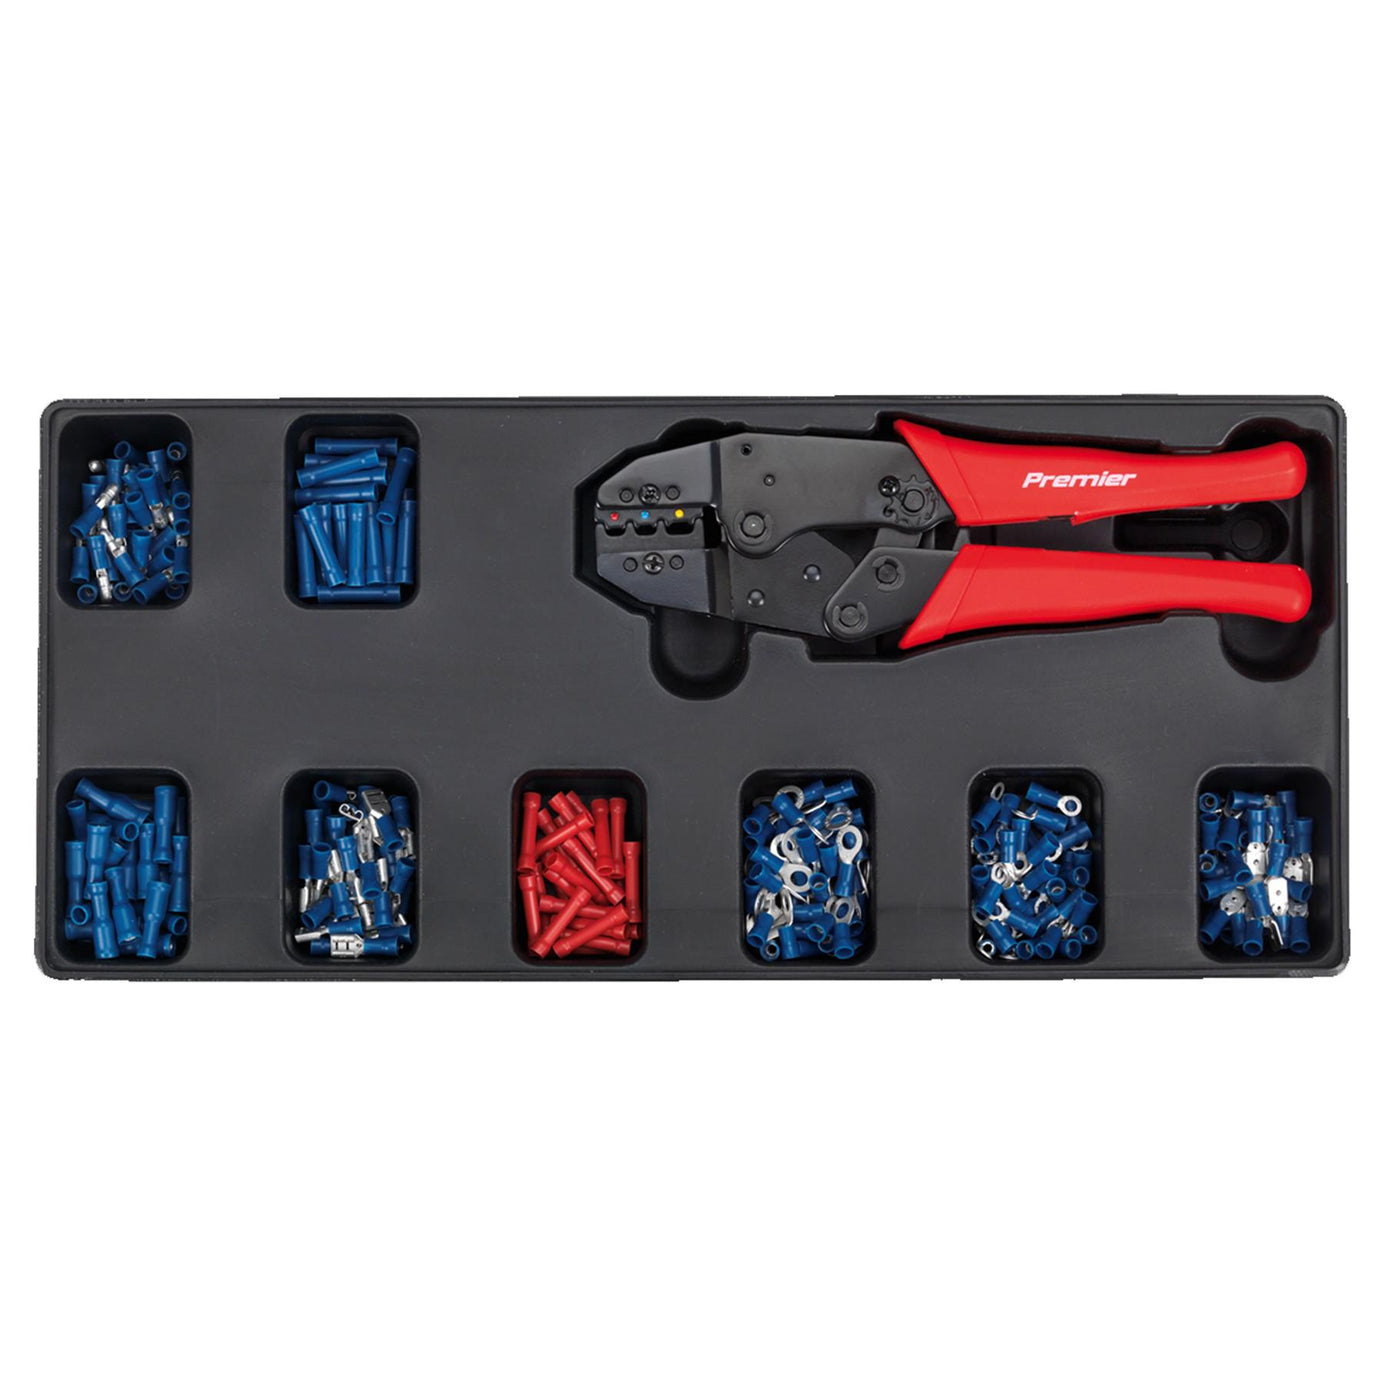 Sealey Tool Tray with Ratchet Crimper & Asstd Insulated Terminals